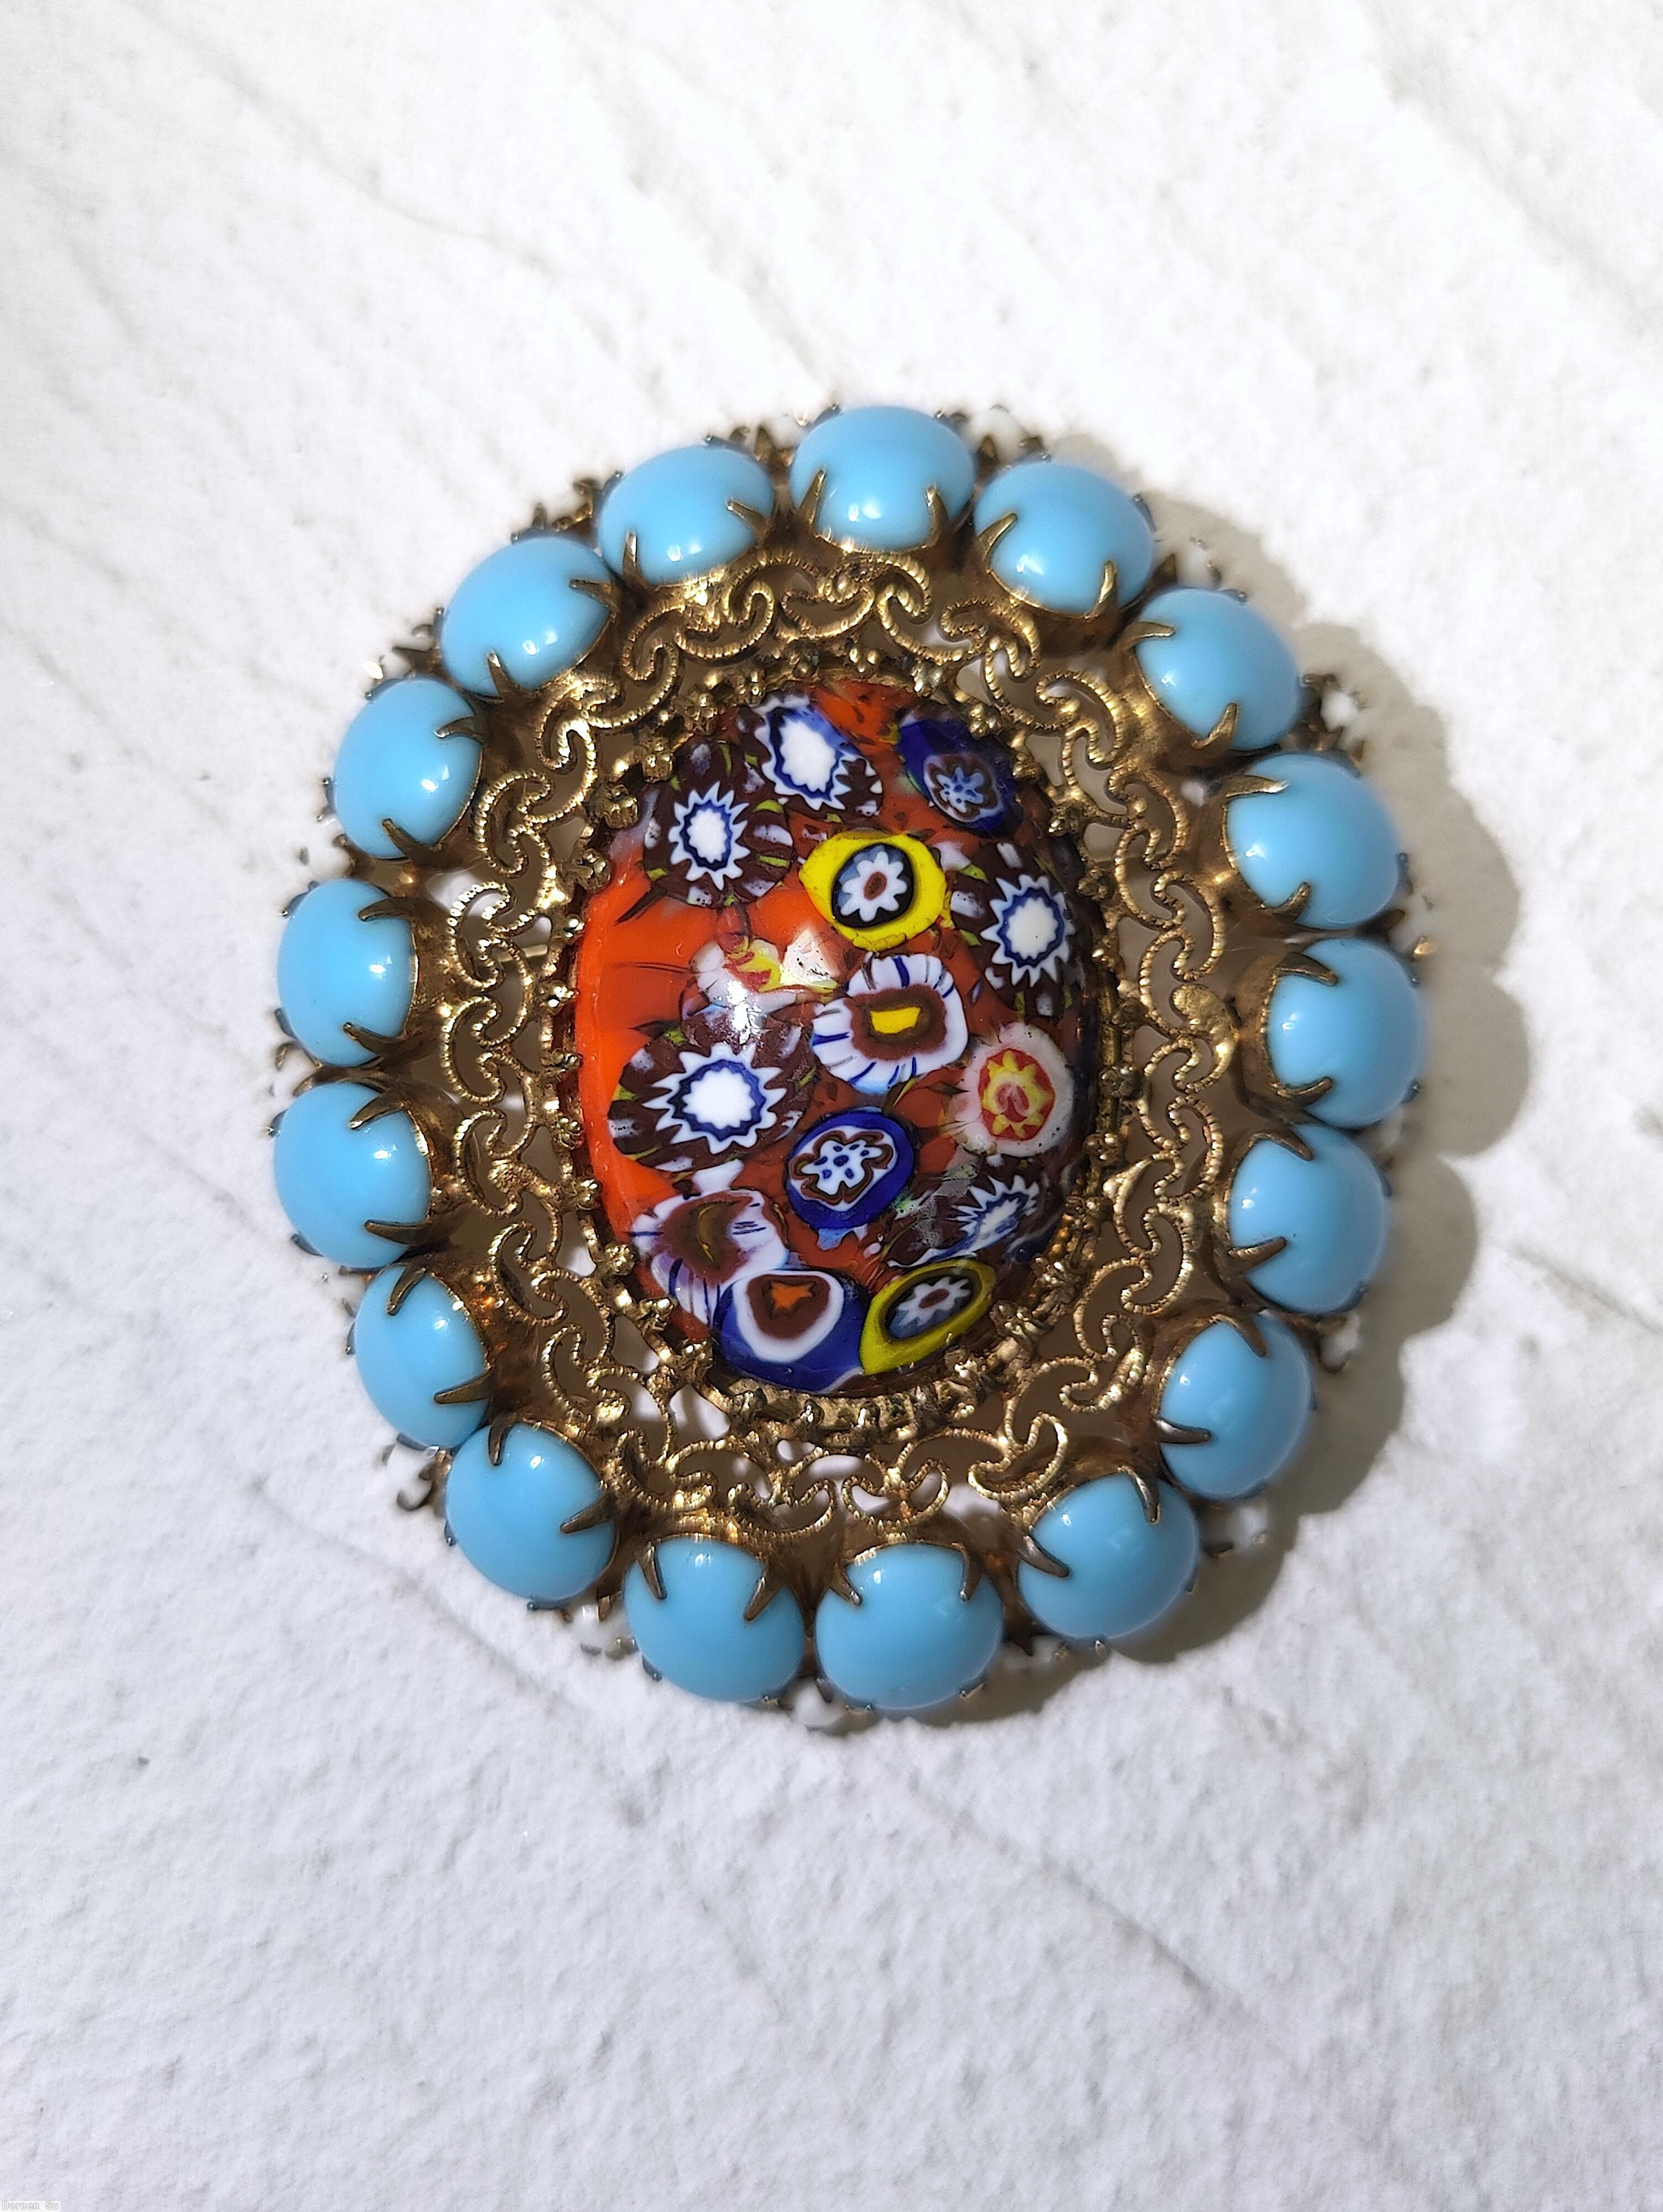 Schreiner large oval millefiori center domed oval pin filigree 17 oval cab side opaque baby blue white seeds goldtone jewelry